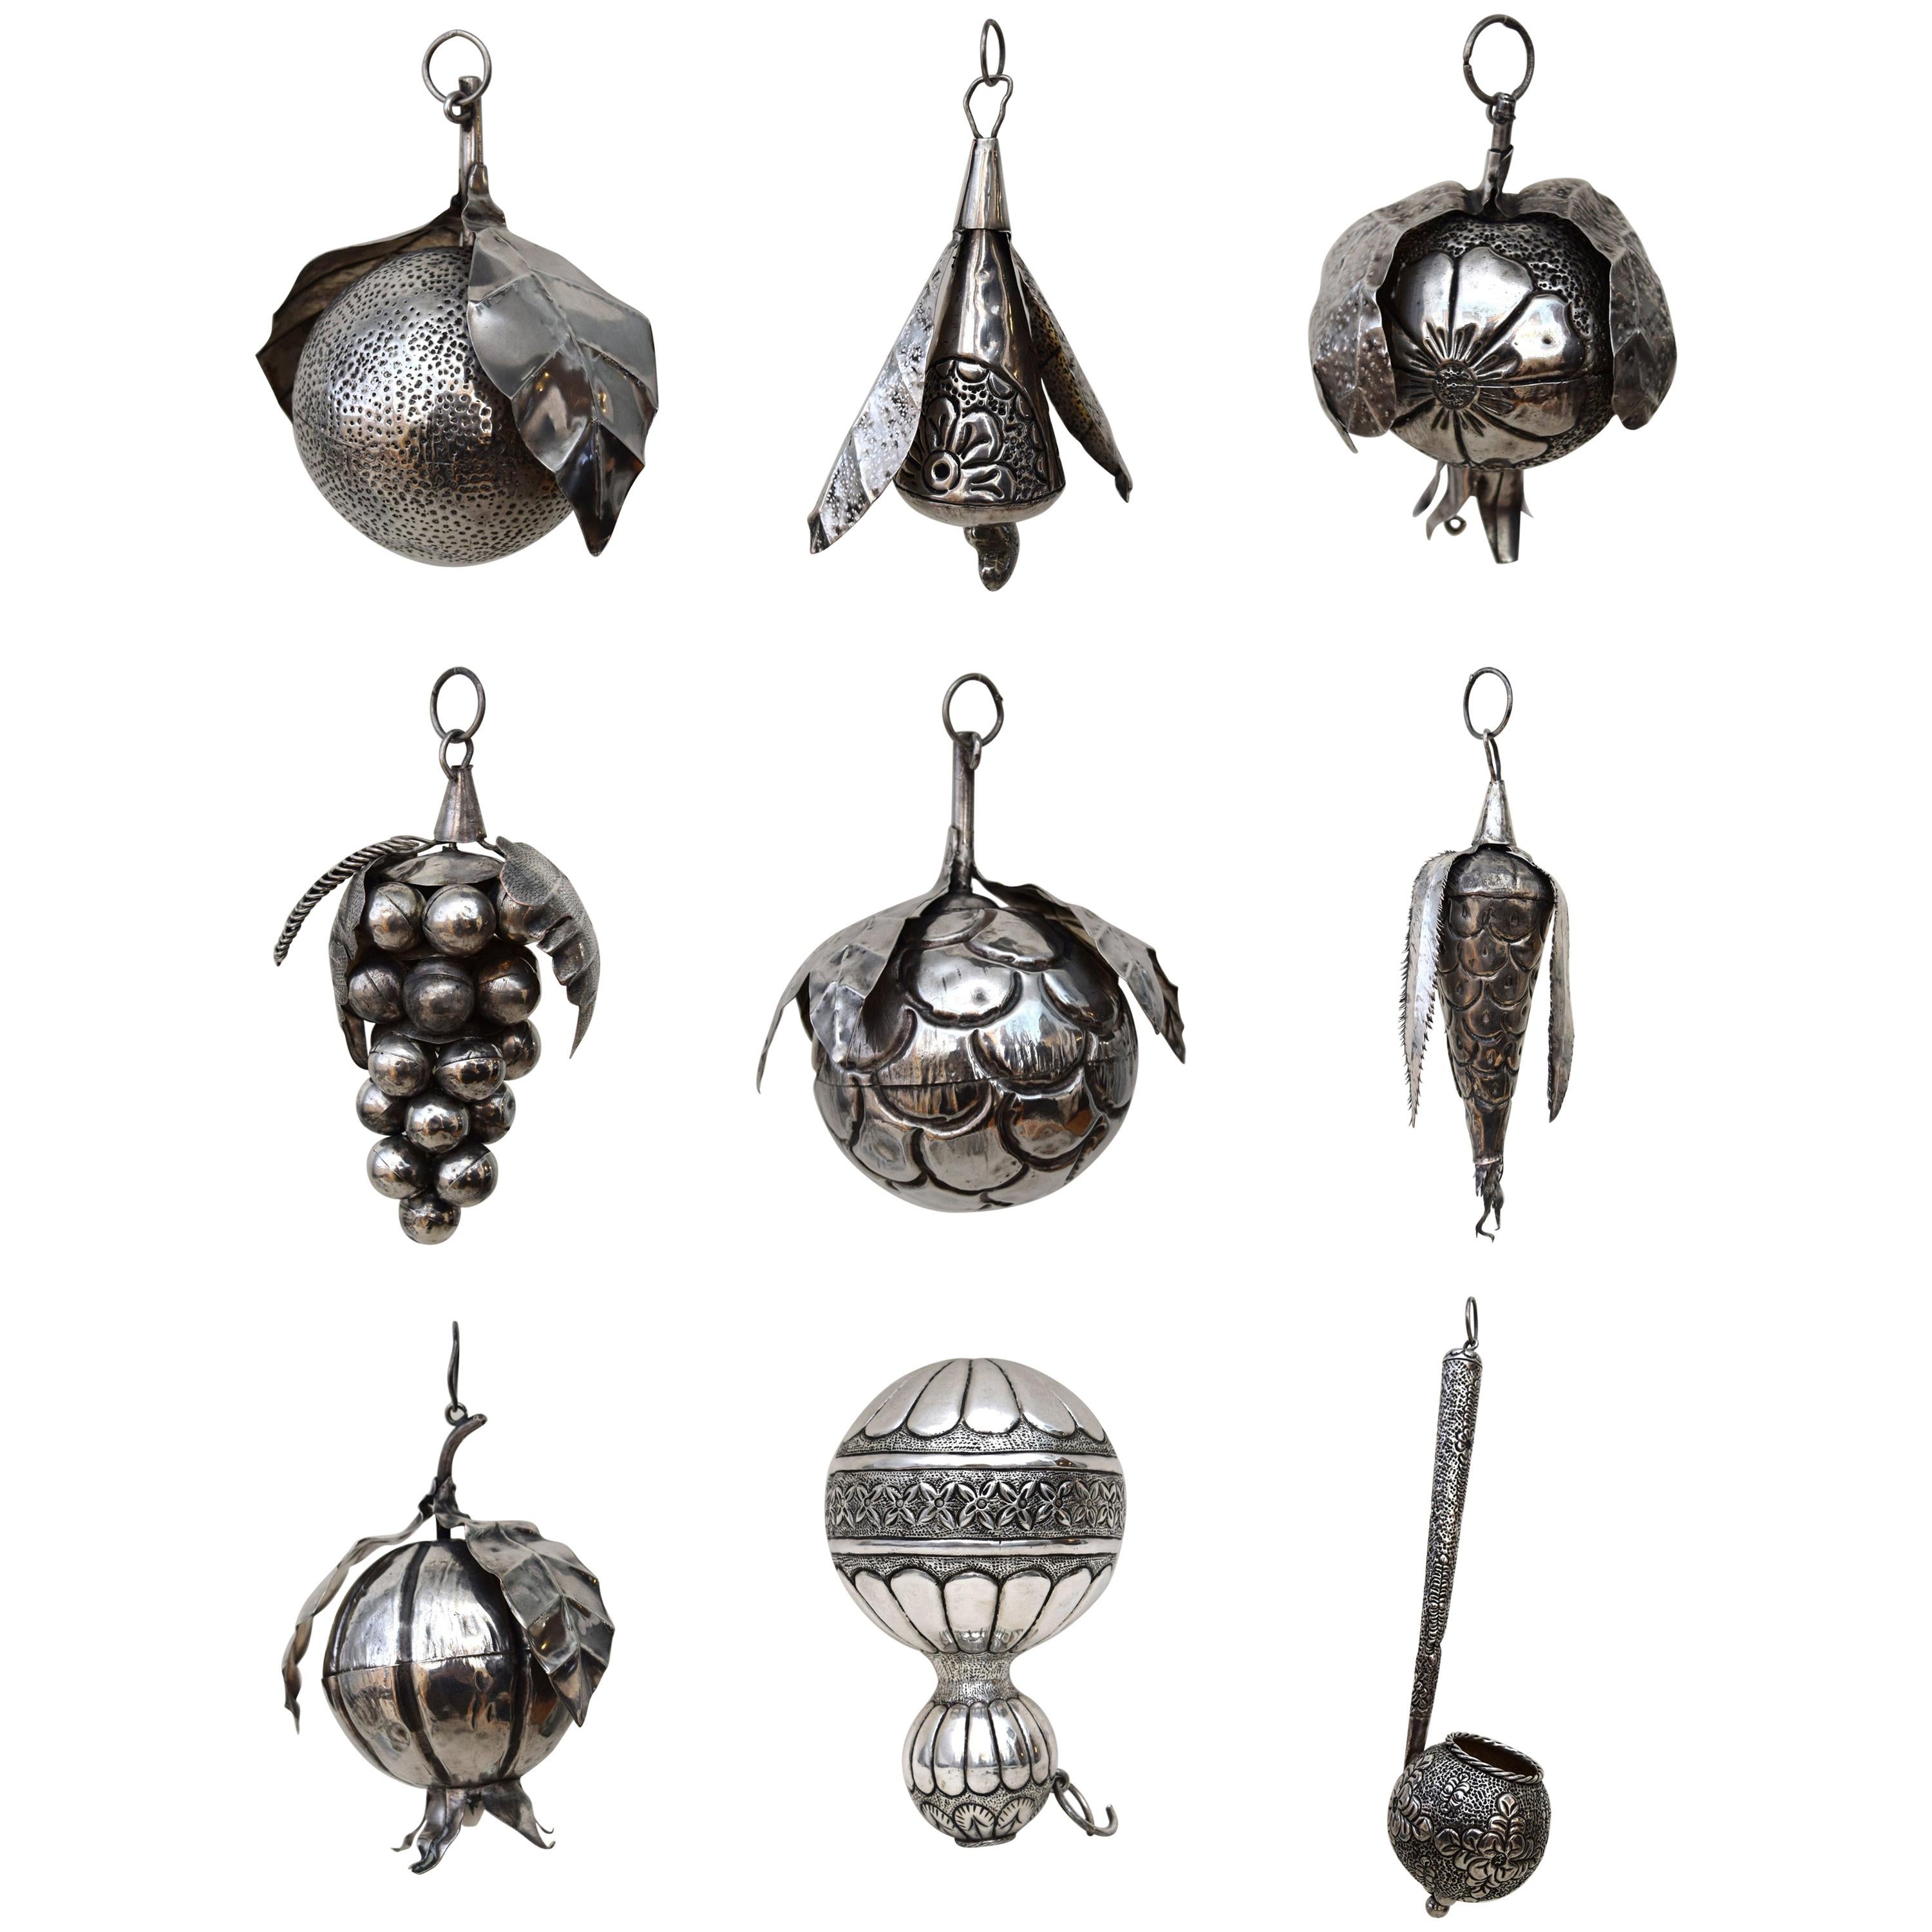 These 31 Brazilian amulets, or balangada, were hammered from sheets of silver in the 19th century to form pomegranates, sugar apples, guava, and other exotic fruits. Symbols of fertility, they were the bling of their day, adorning the wrists and